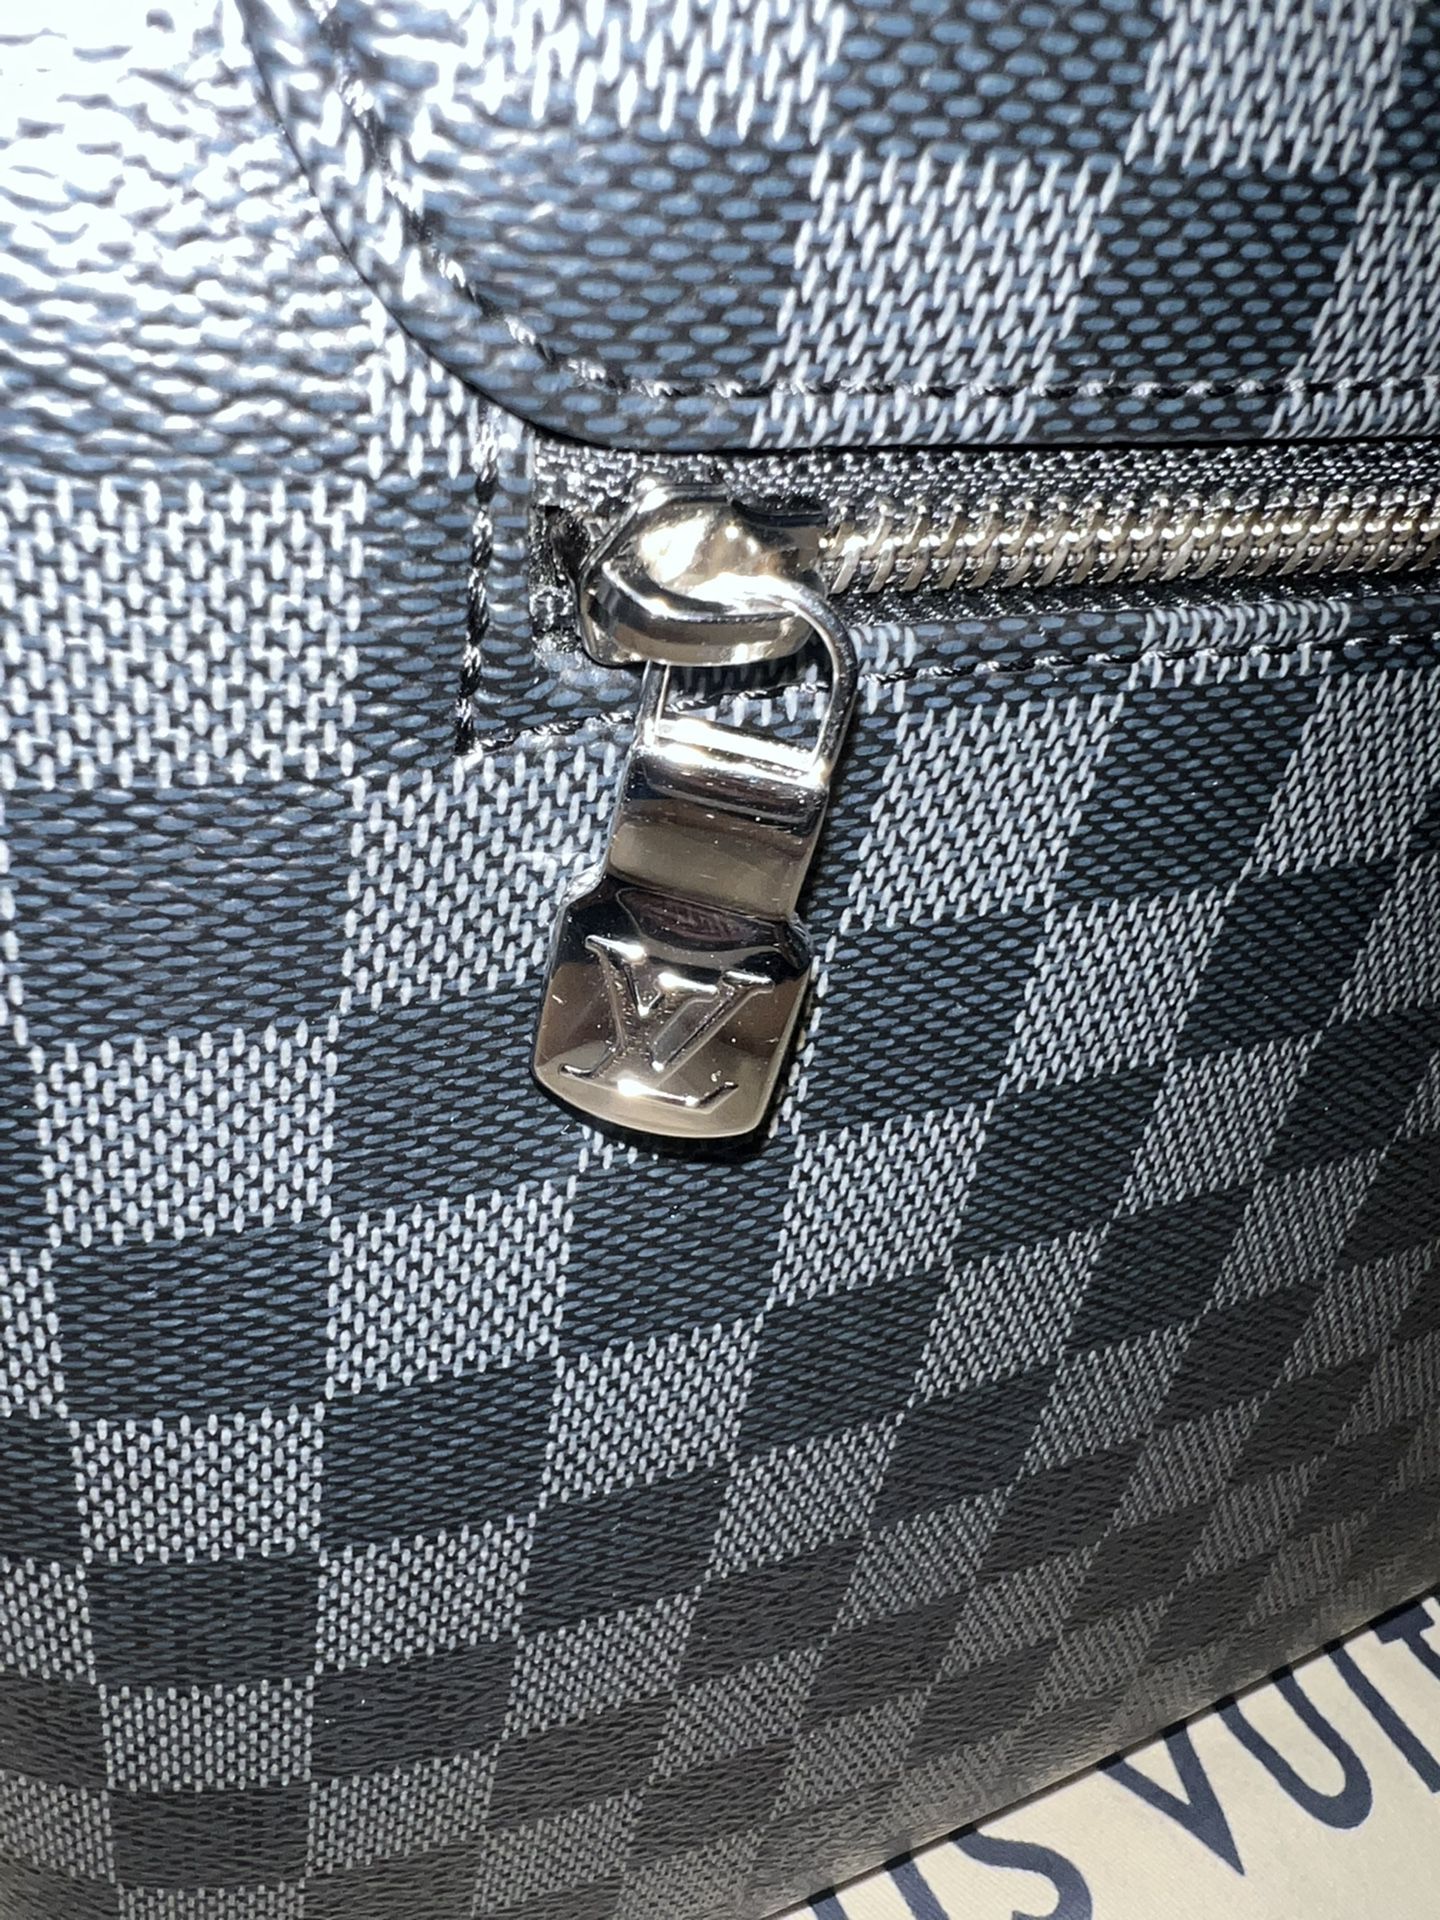 Louis Vuitton Monogram Duo Messenger Blue for Sale in West Los Angeles, CA  - OfferUp